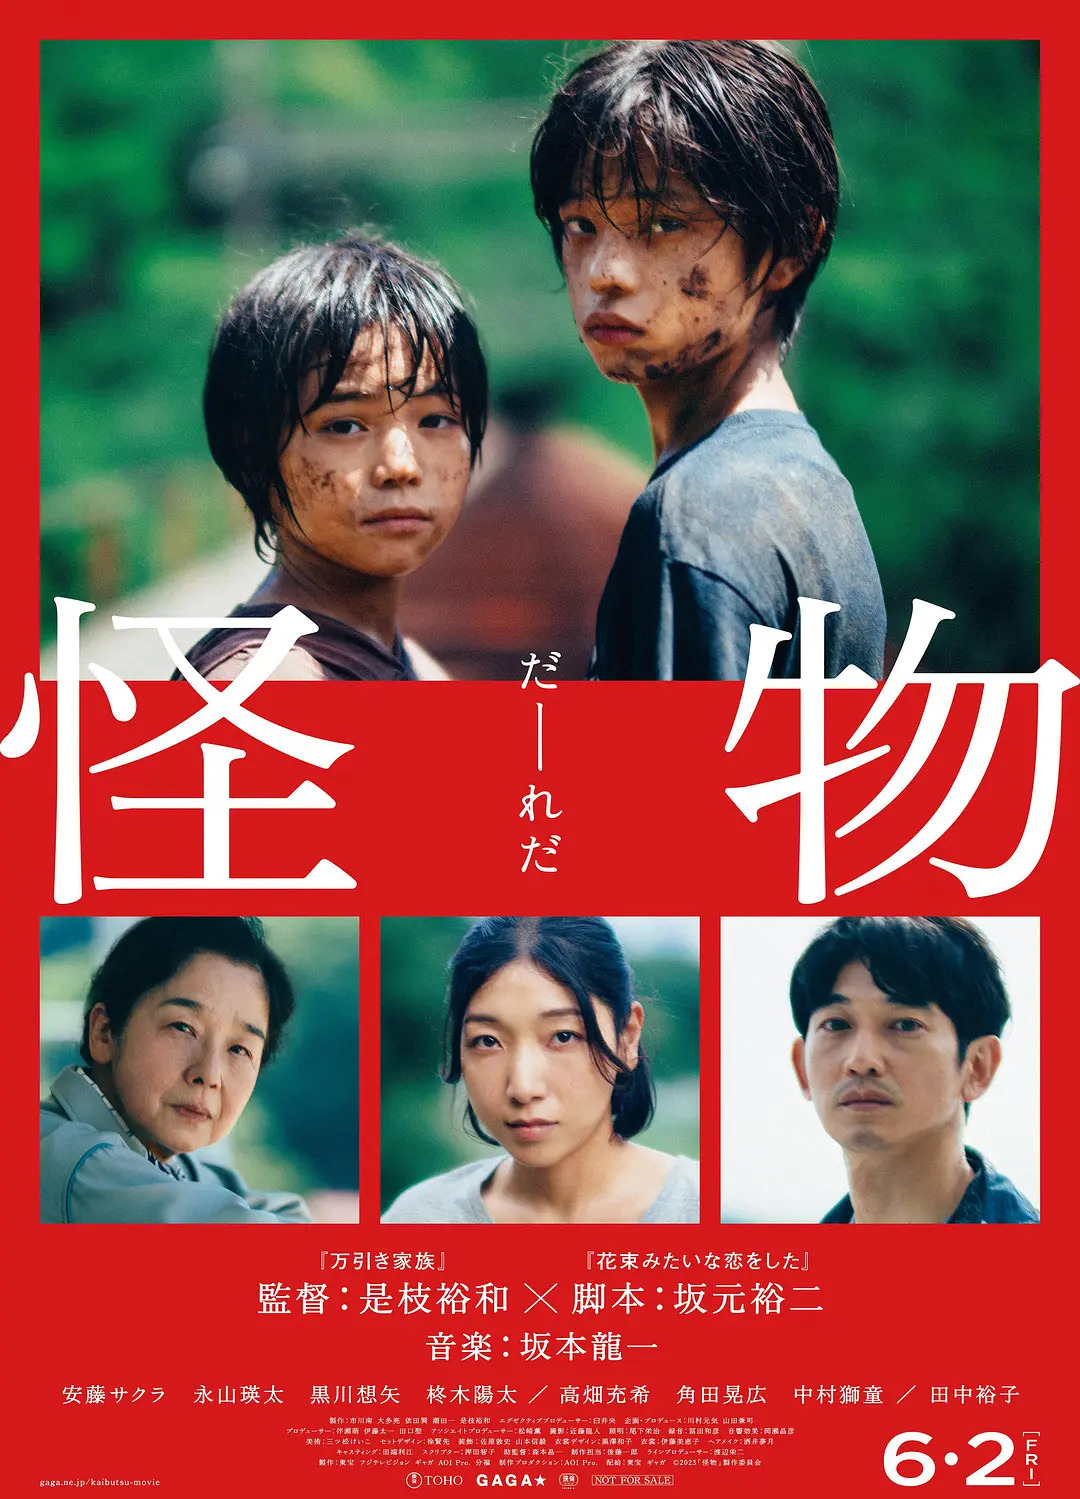 Extra Large Movie Poster Image for Kaibutsu (#1 of 8)